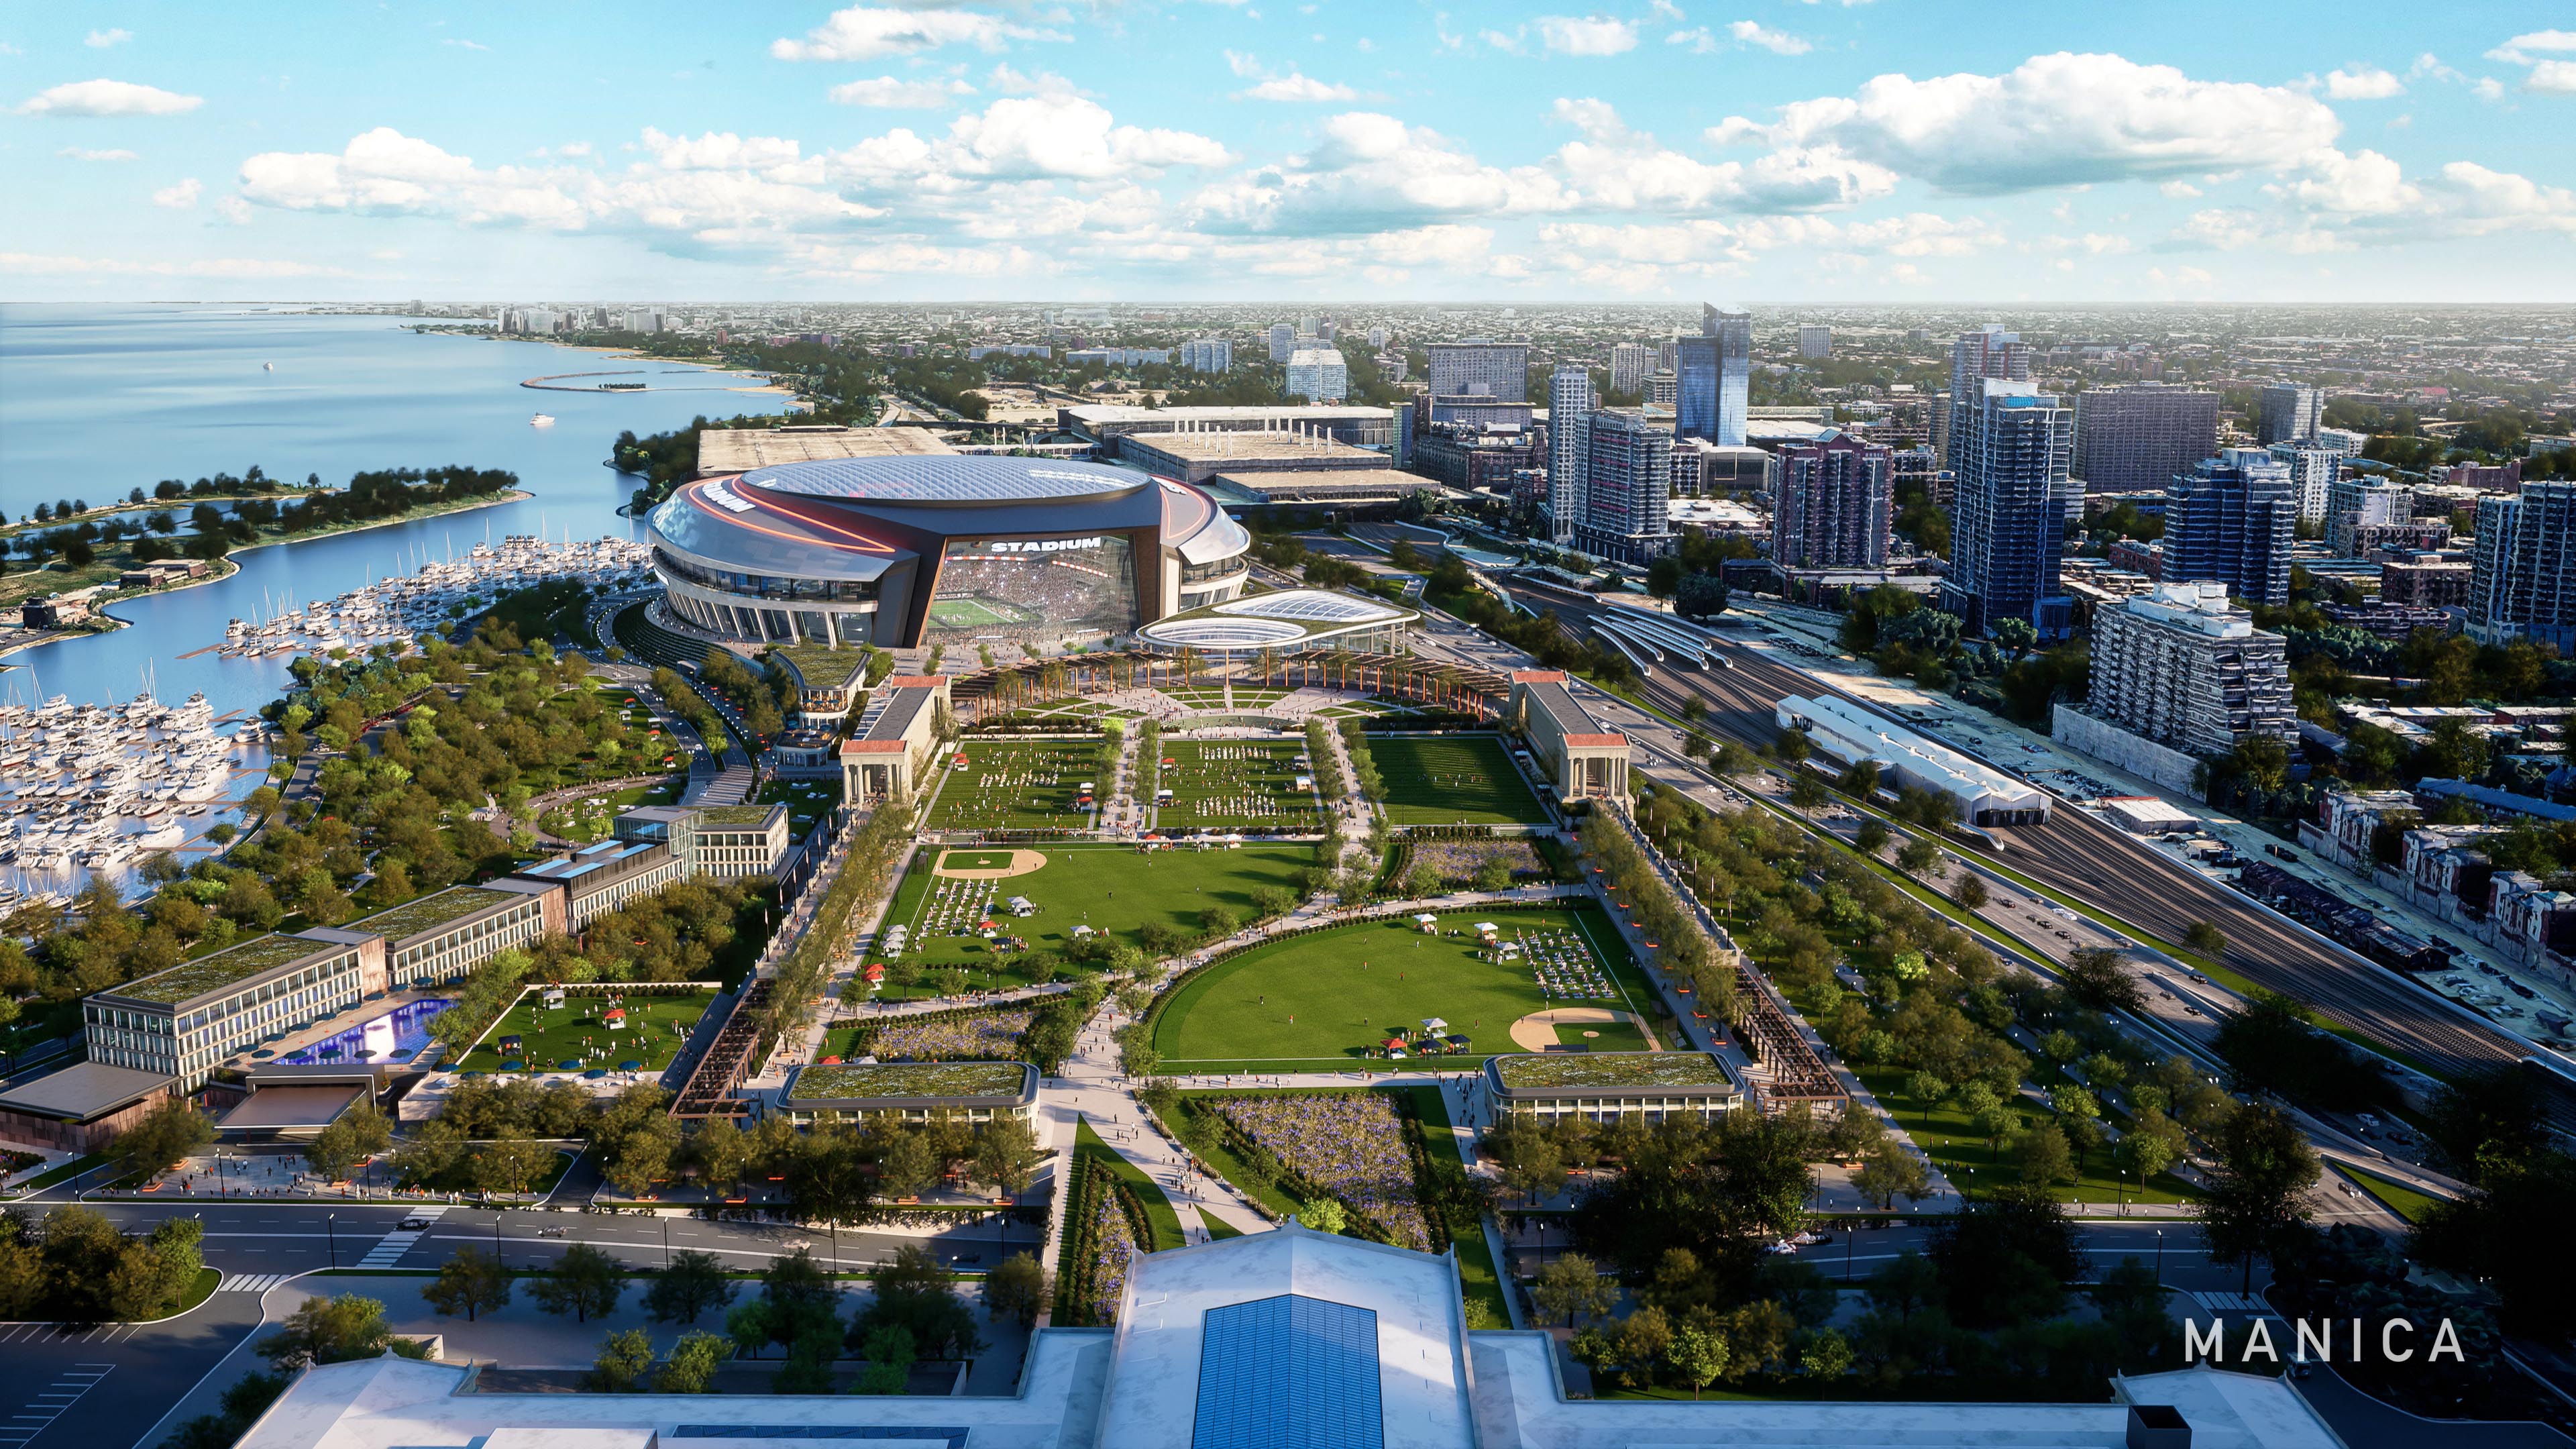 Renderings of a new state-of-the-art enclosed stadium with open space access to the lakefront were released by the Chicago Bears on April 24, 2024. (Manica)